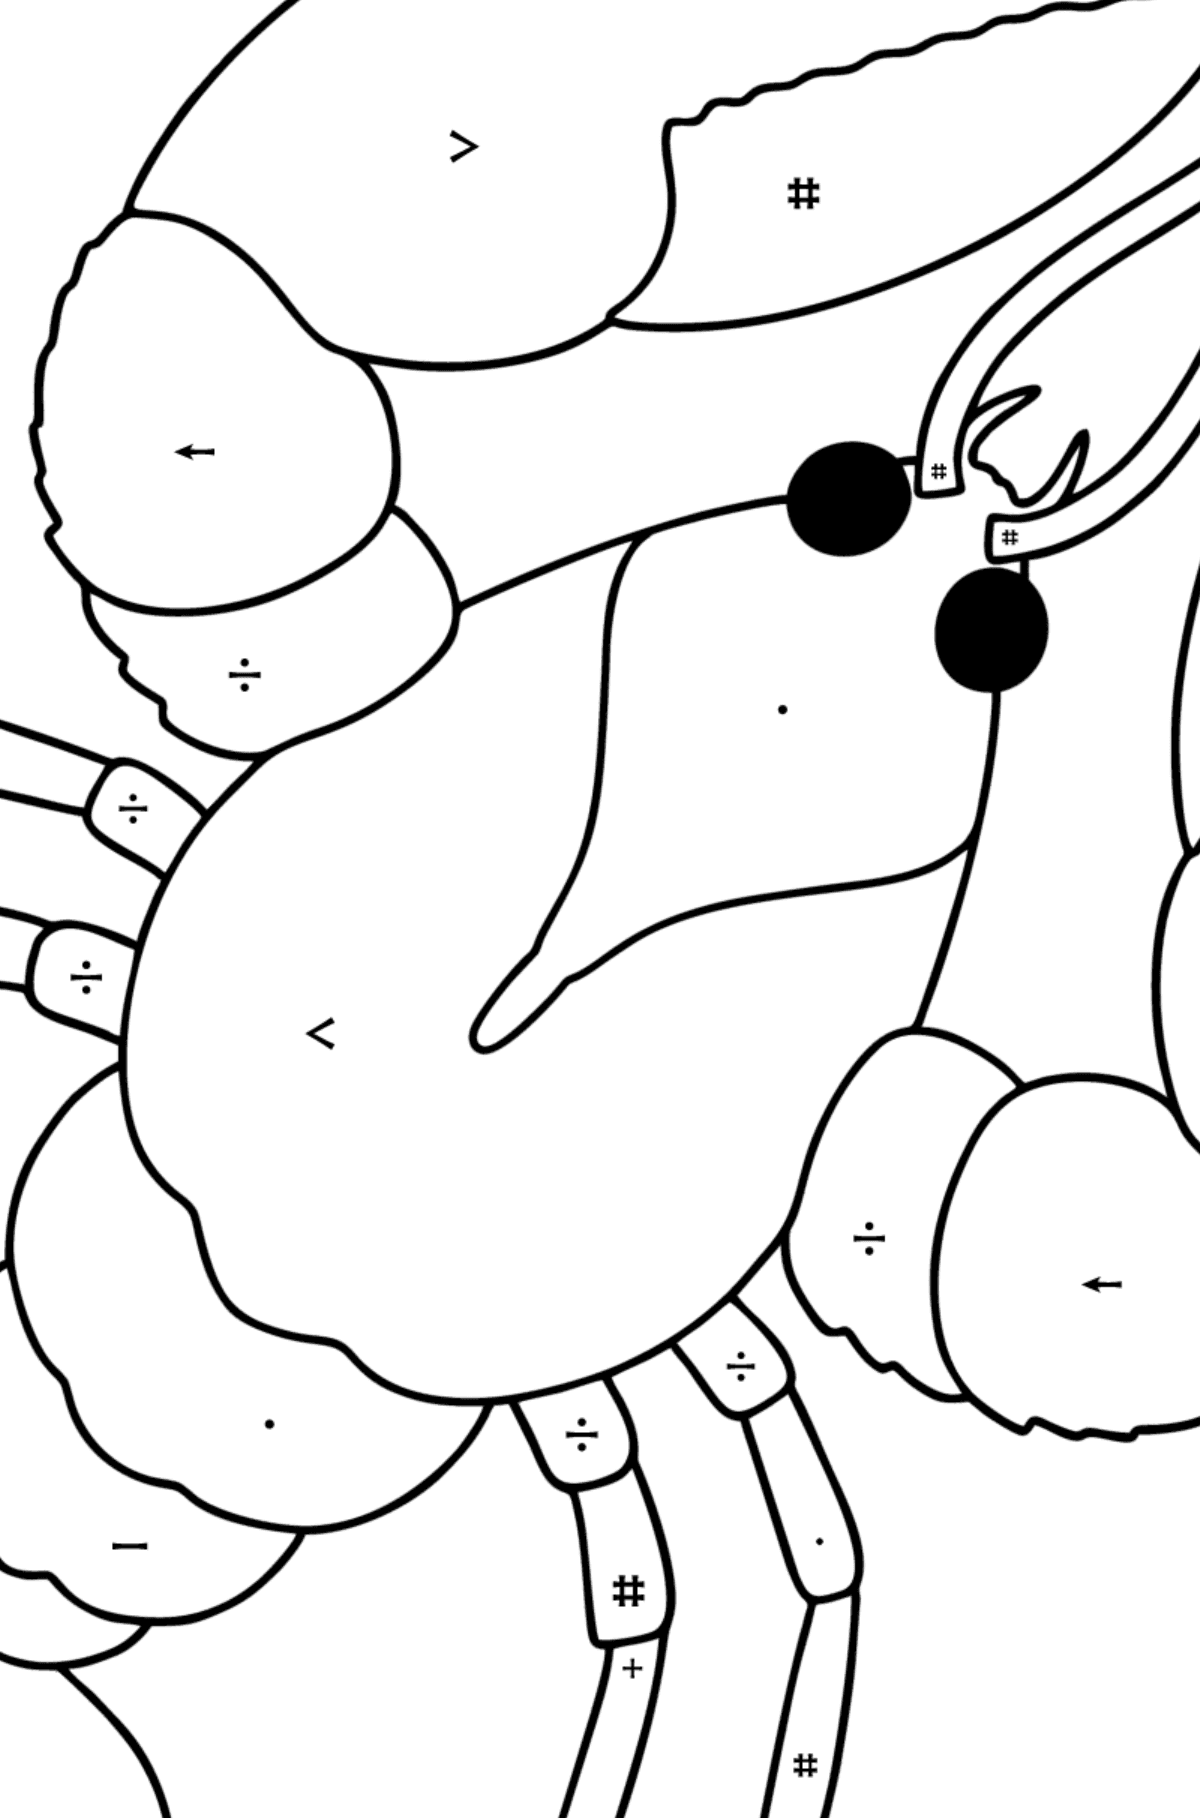 Lobster coloring page - Coloring by Symbols for Kids